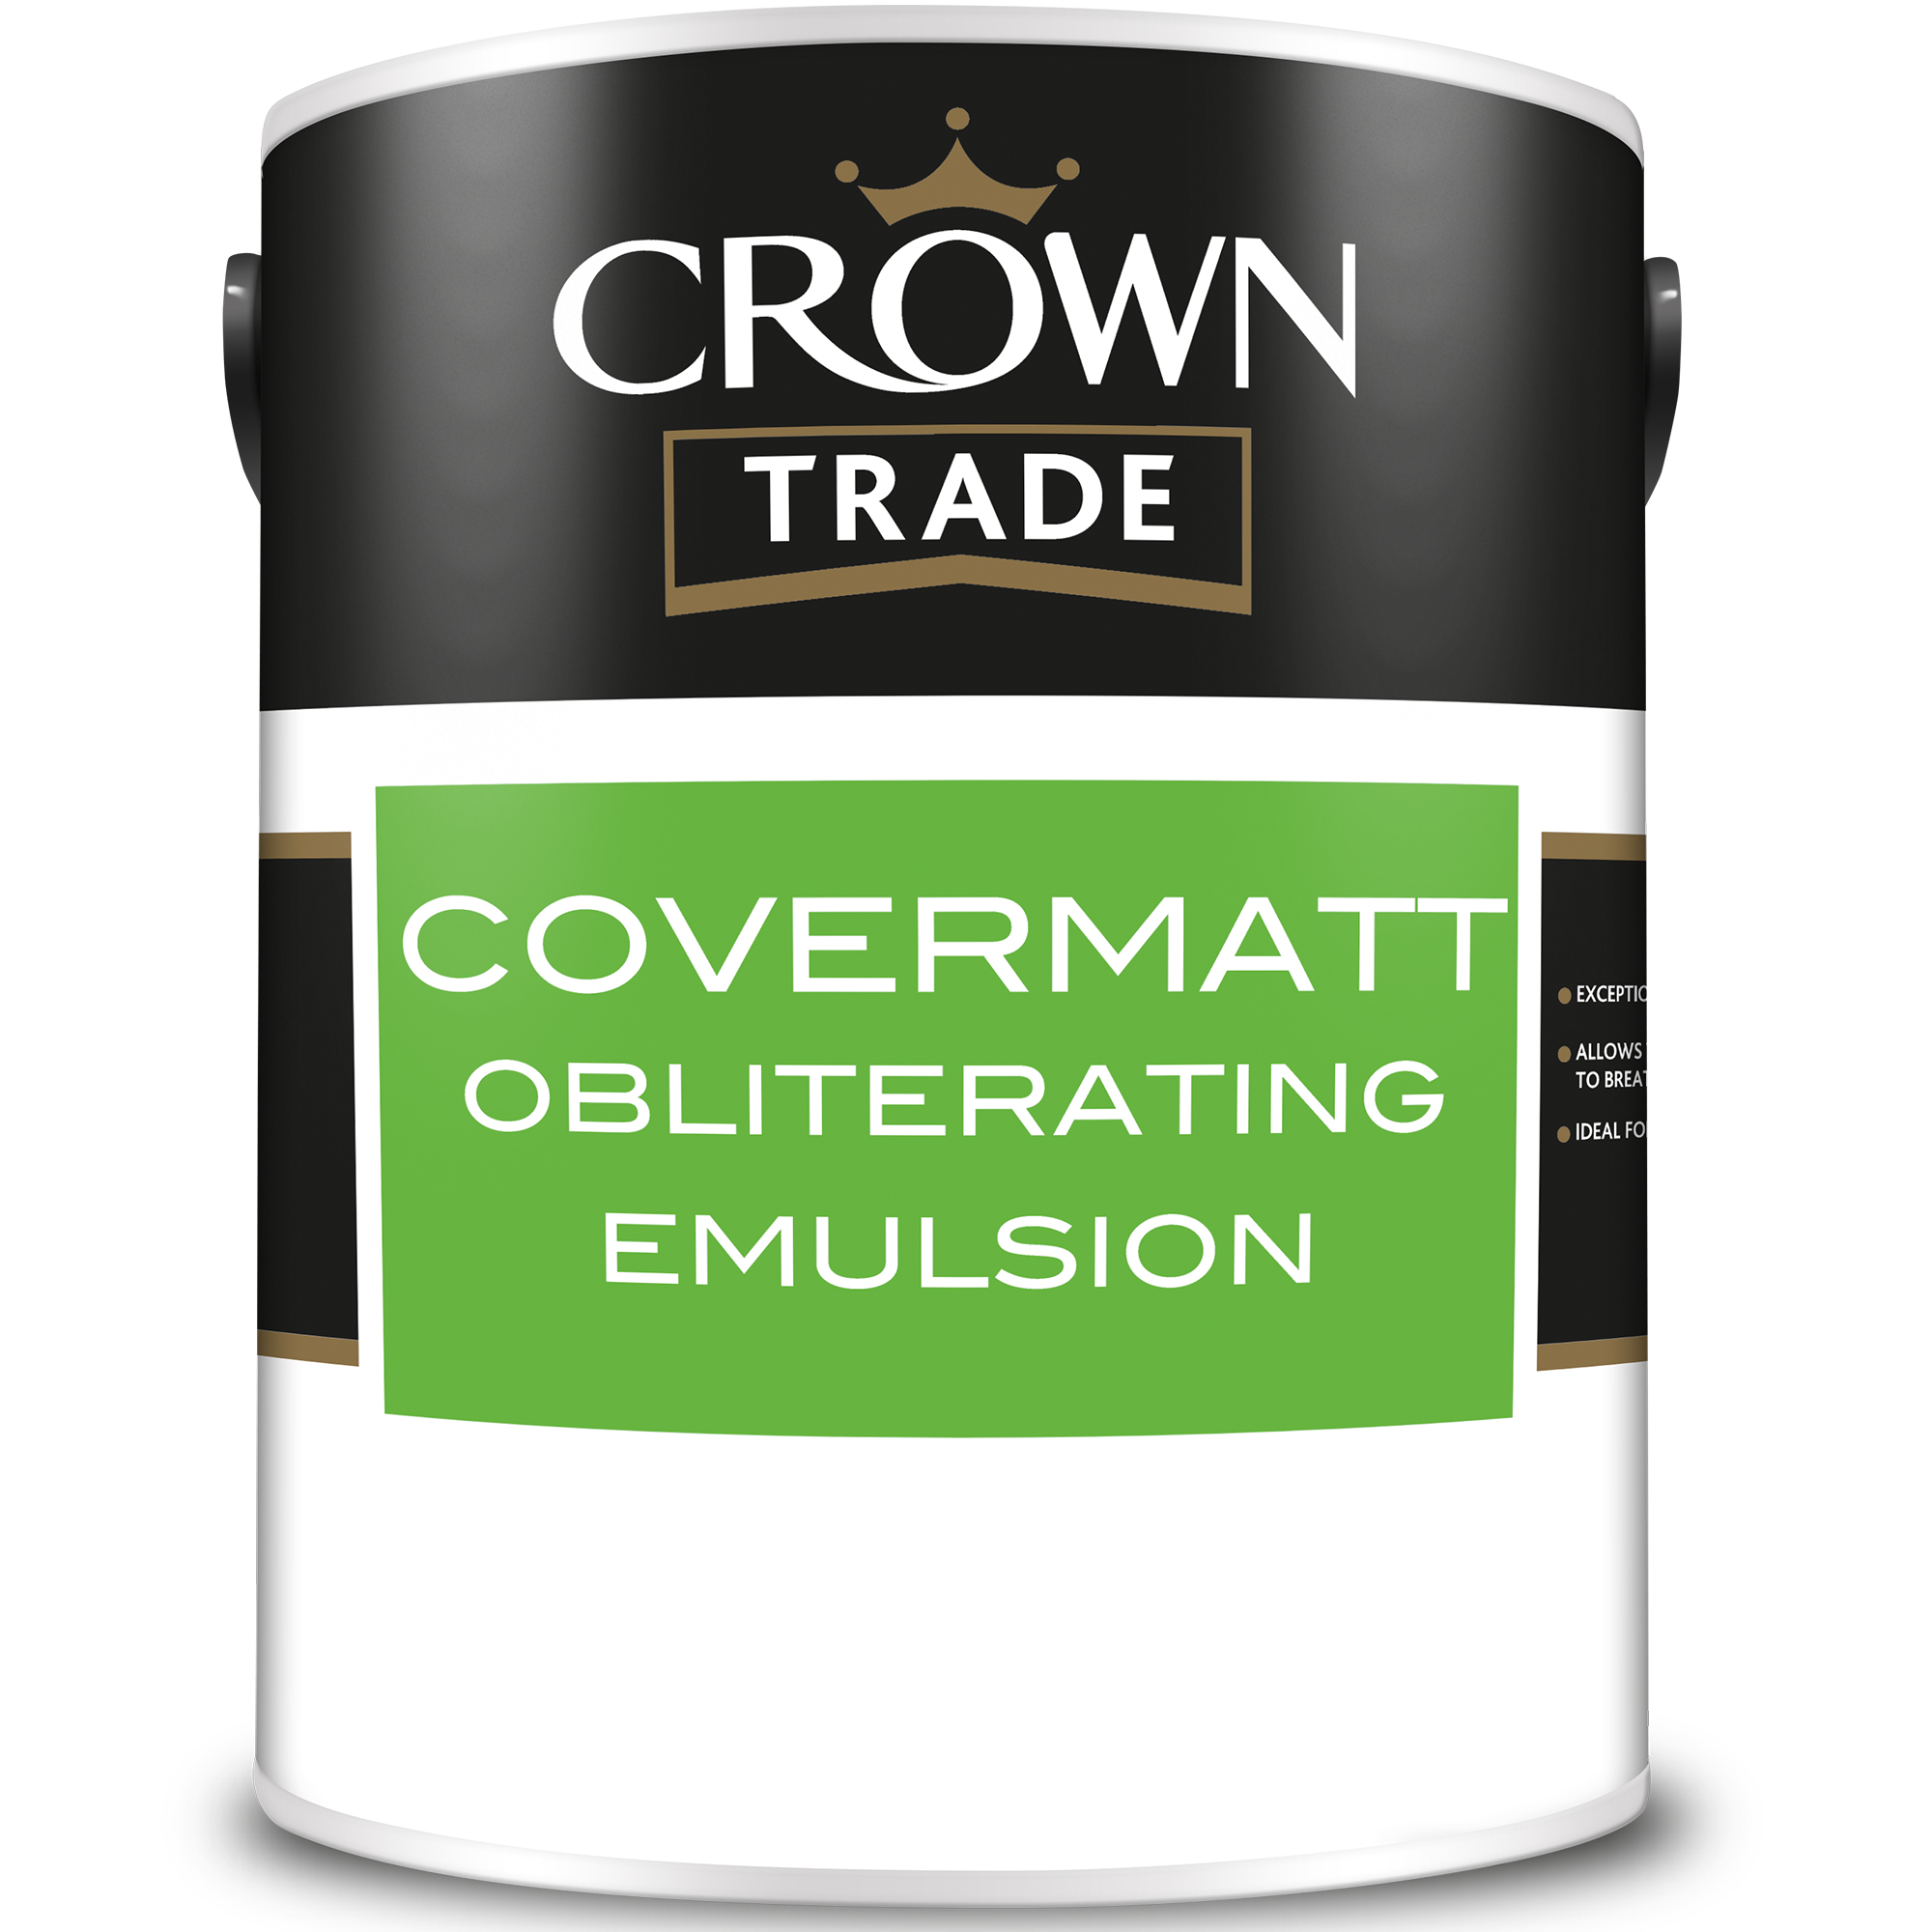 Canvas White, Crown Trade Paints